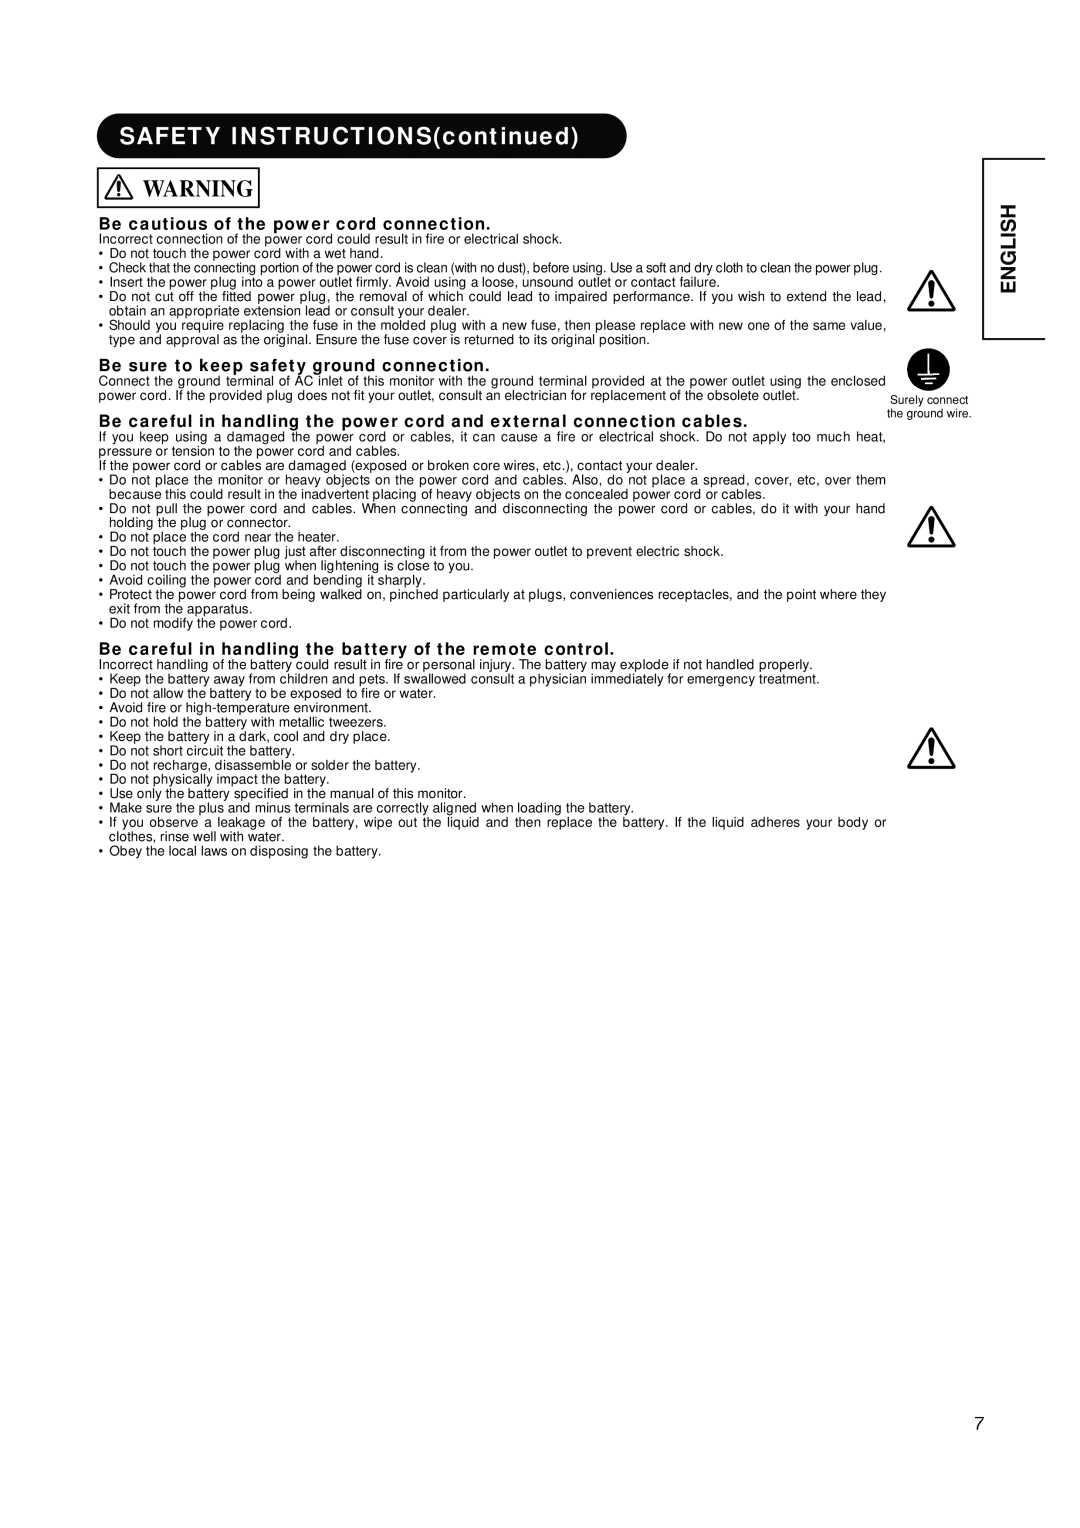 Hitachi PW1A user manual SAFETY INSTRUCTIONScontinued, English, Be cautious of the power cord connection 